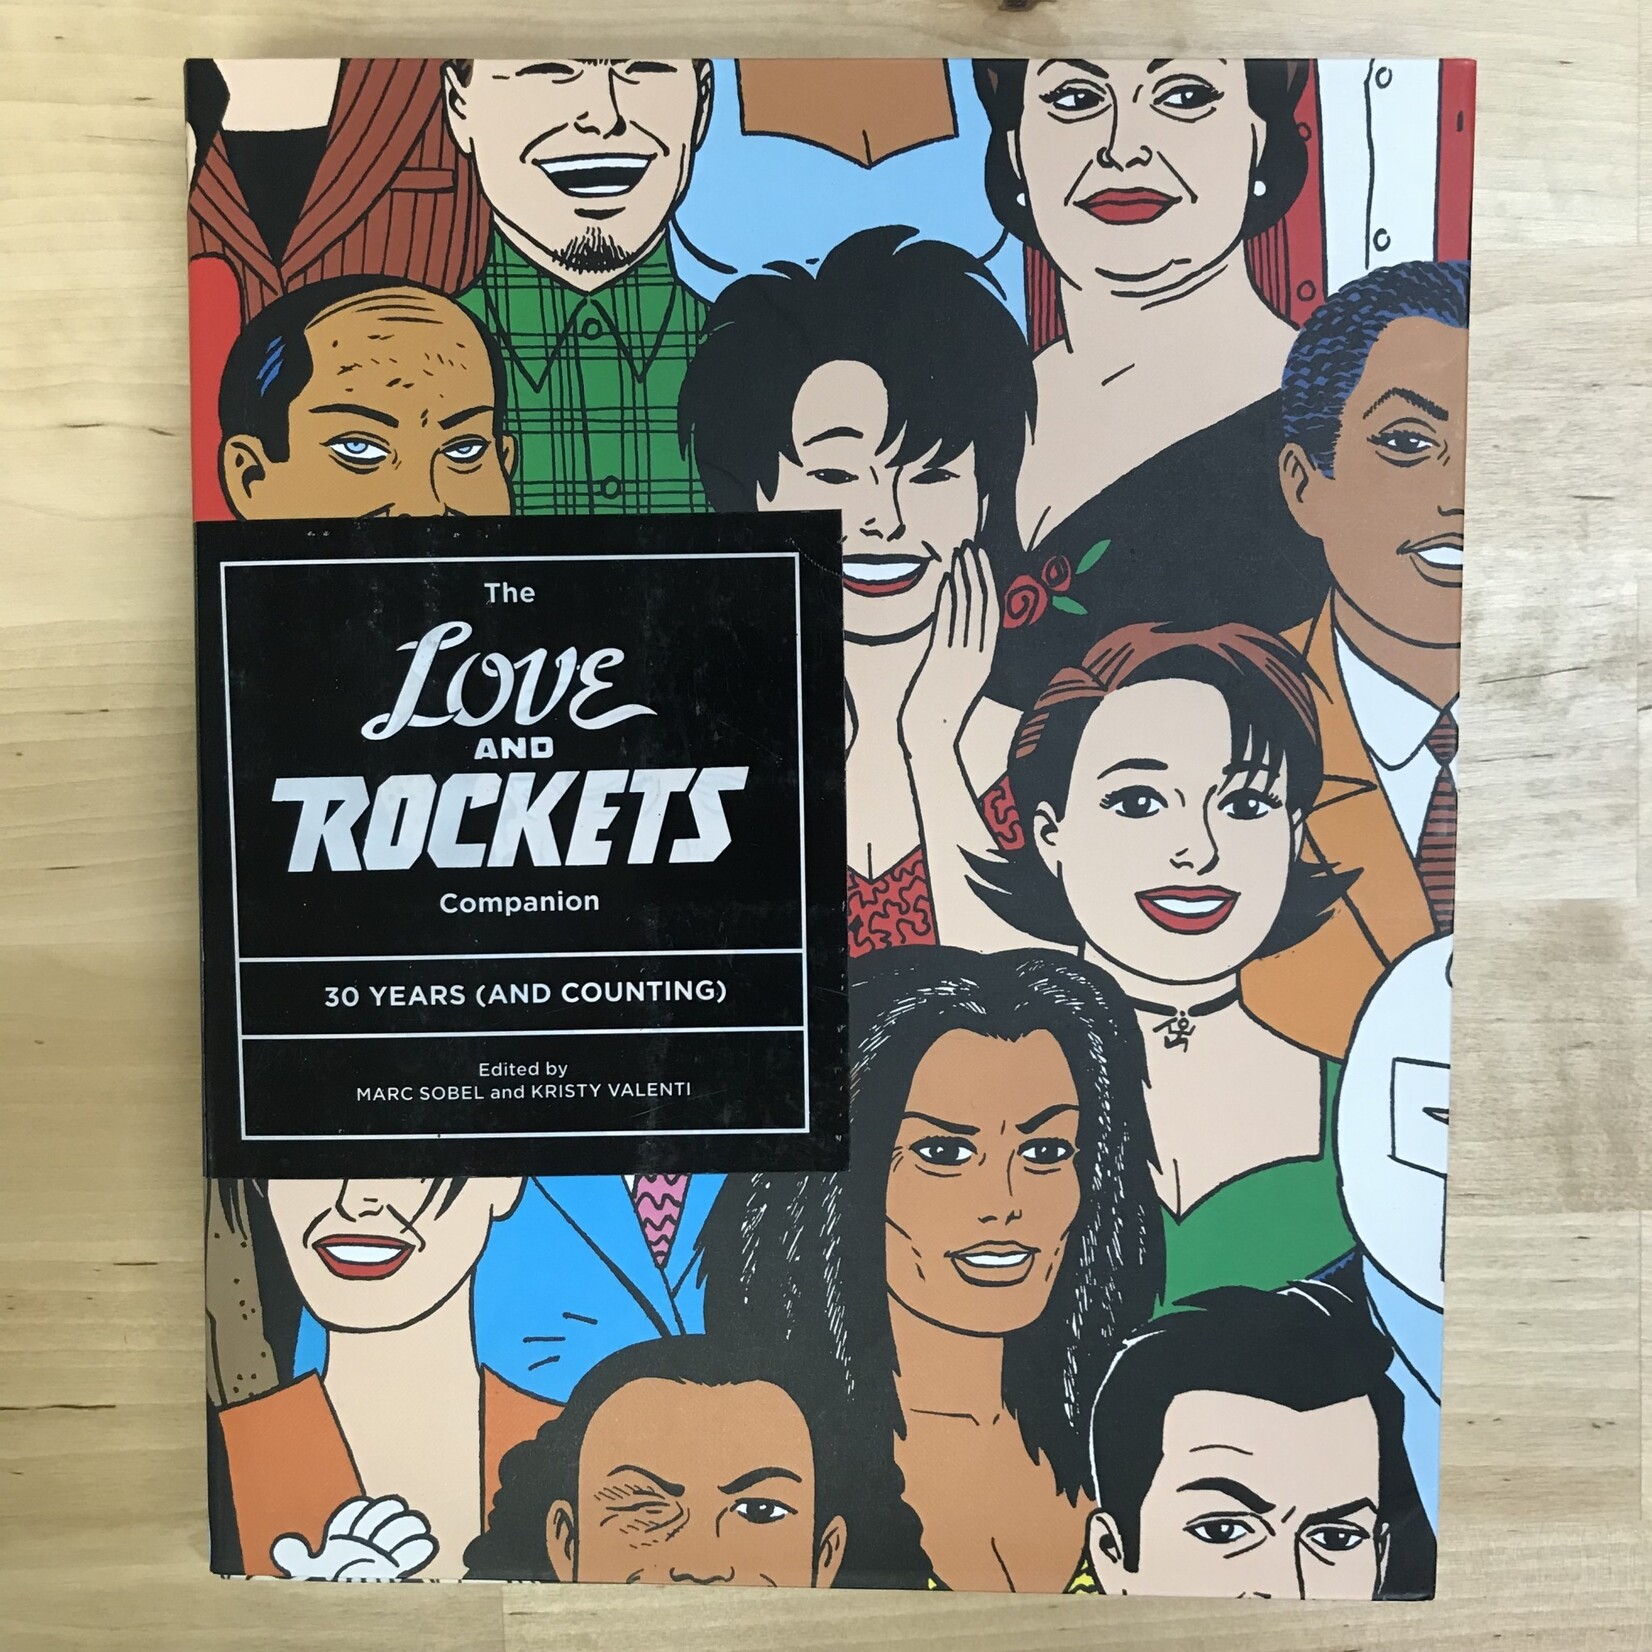 Marc Sobel, Kristy Valenti - The Love And Rockets Companion - Paperback (NEW)